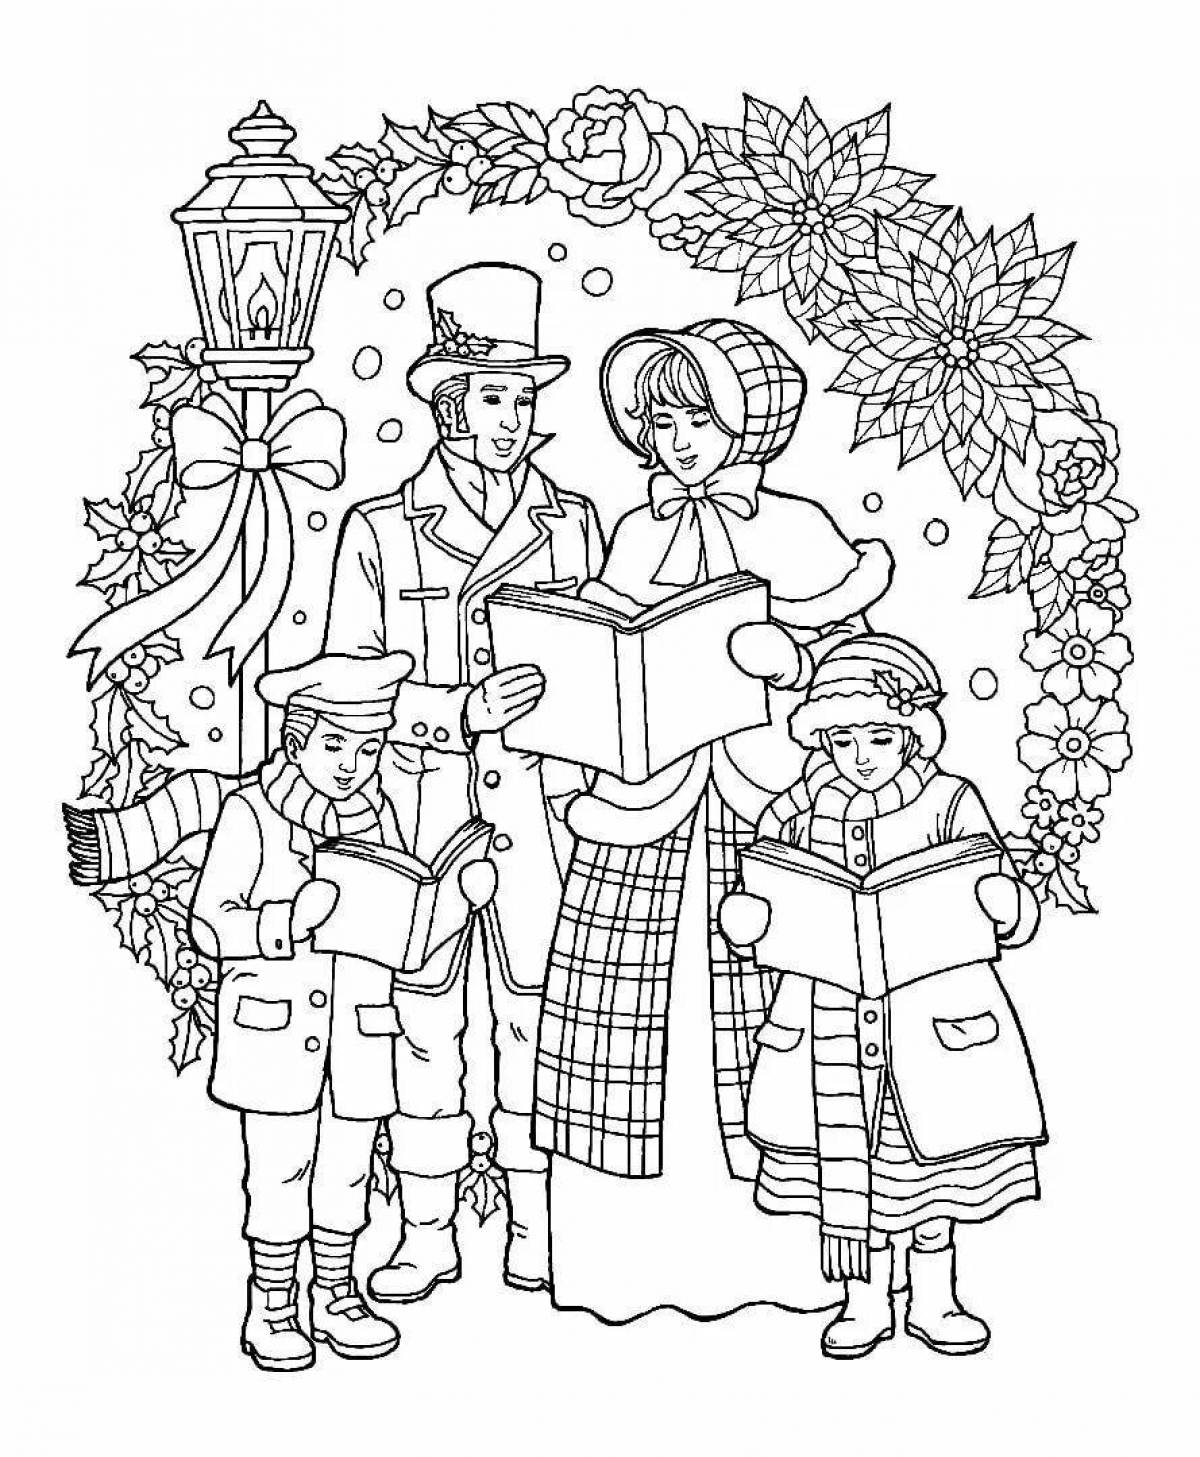 Shiny caroling coloring pages